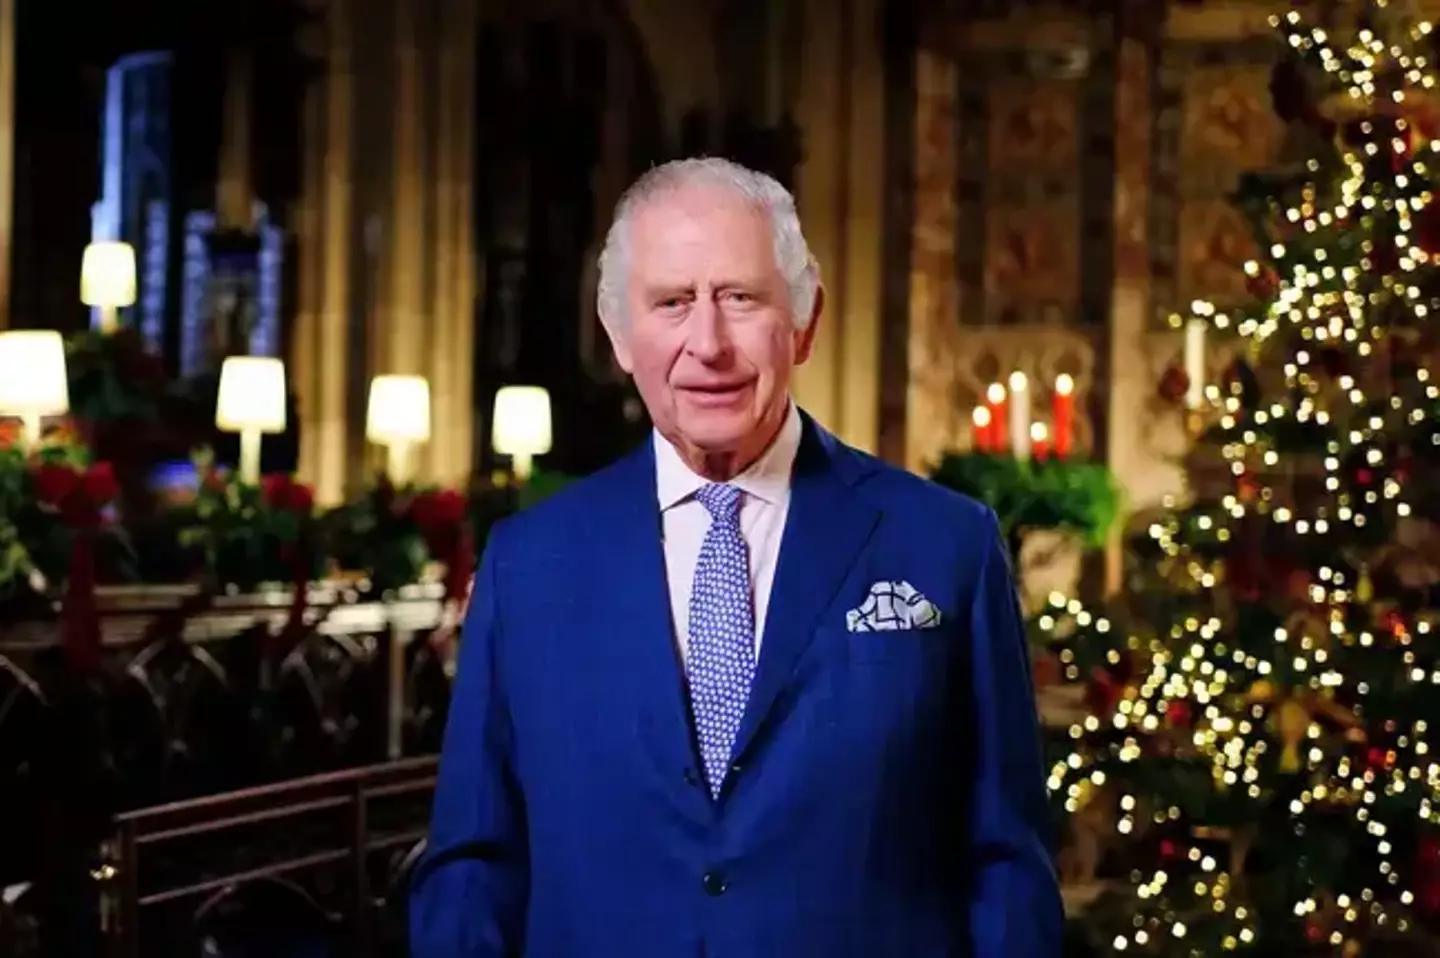 King Charles addressed the nation from St George's Chapel in his first Christmas speech.